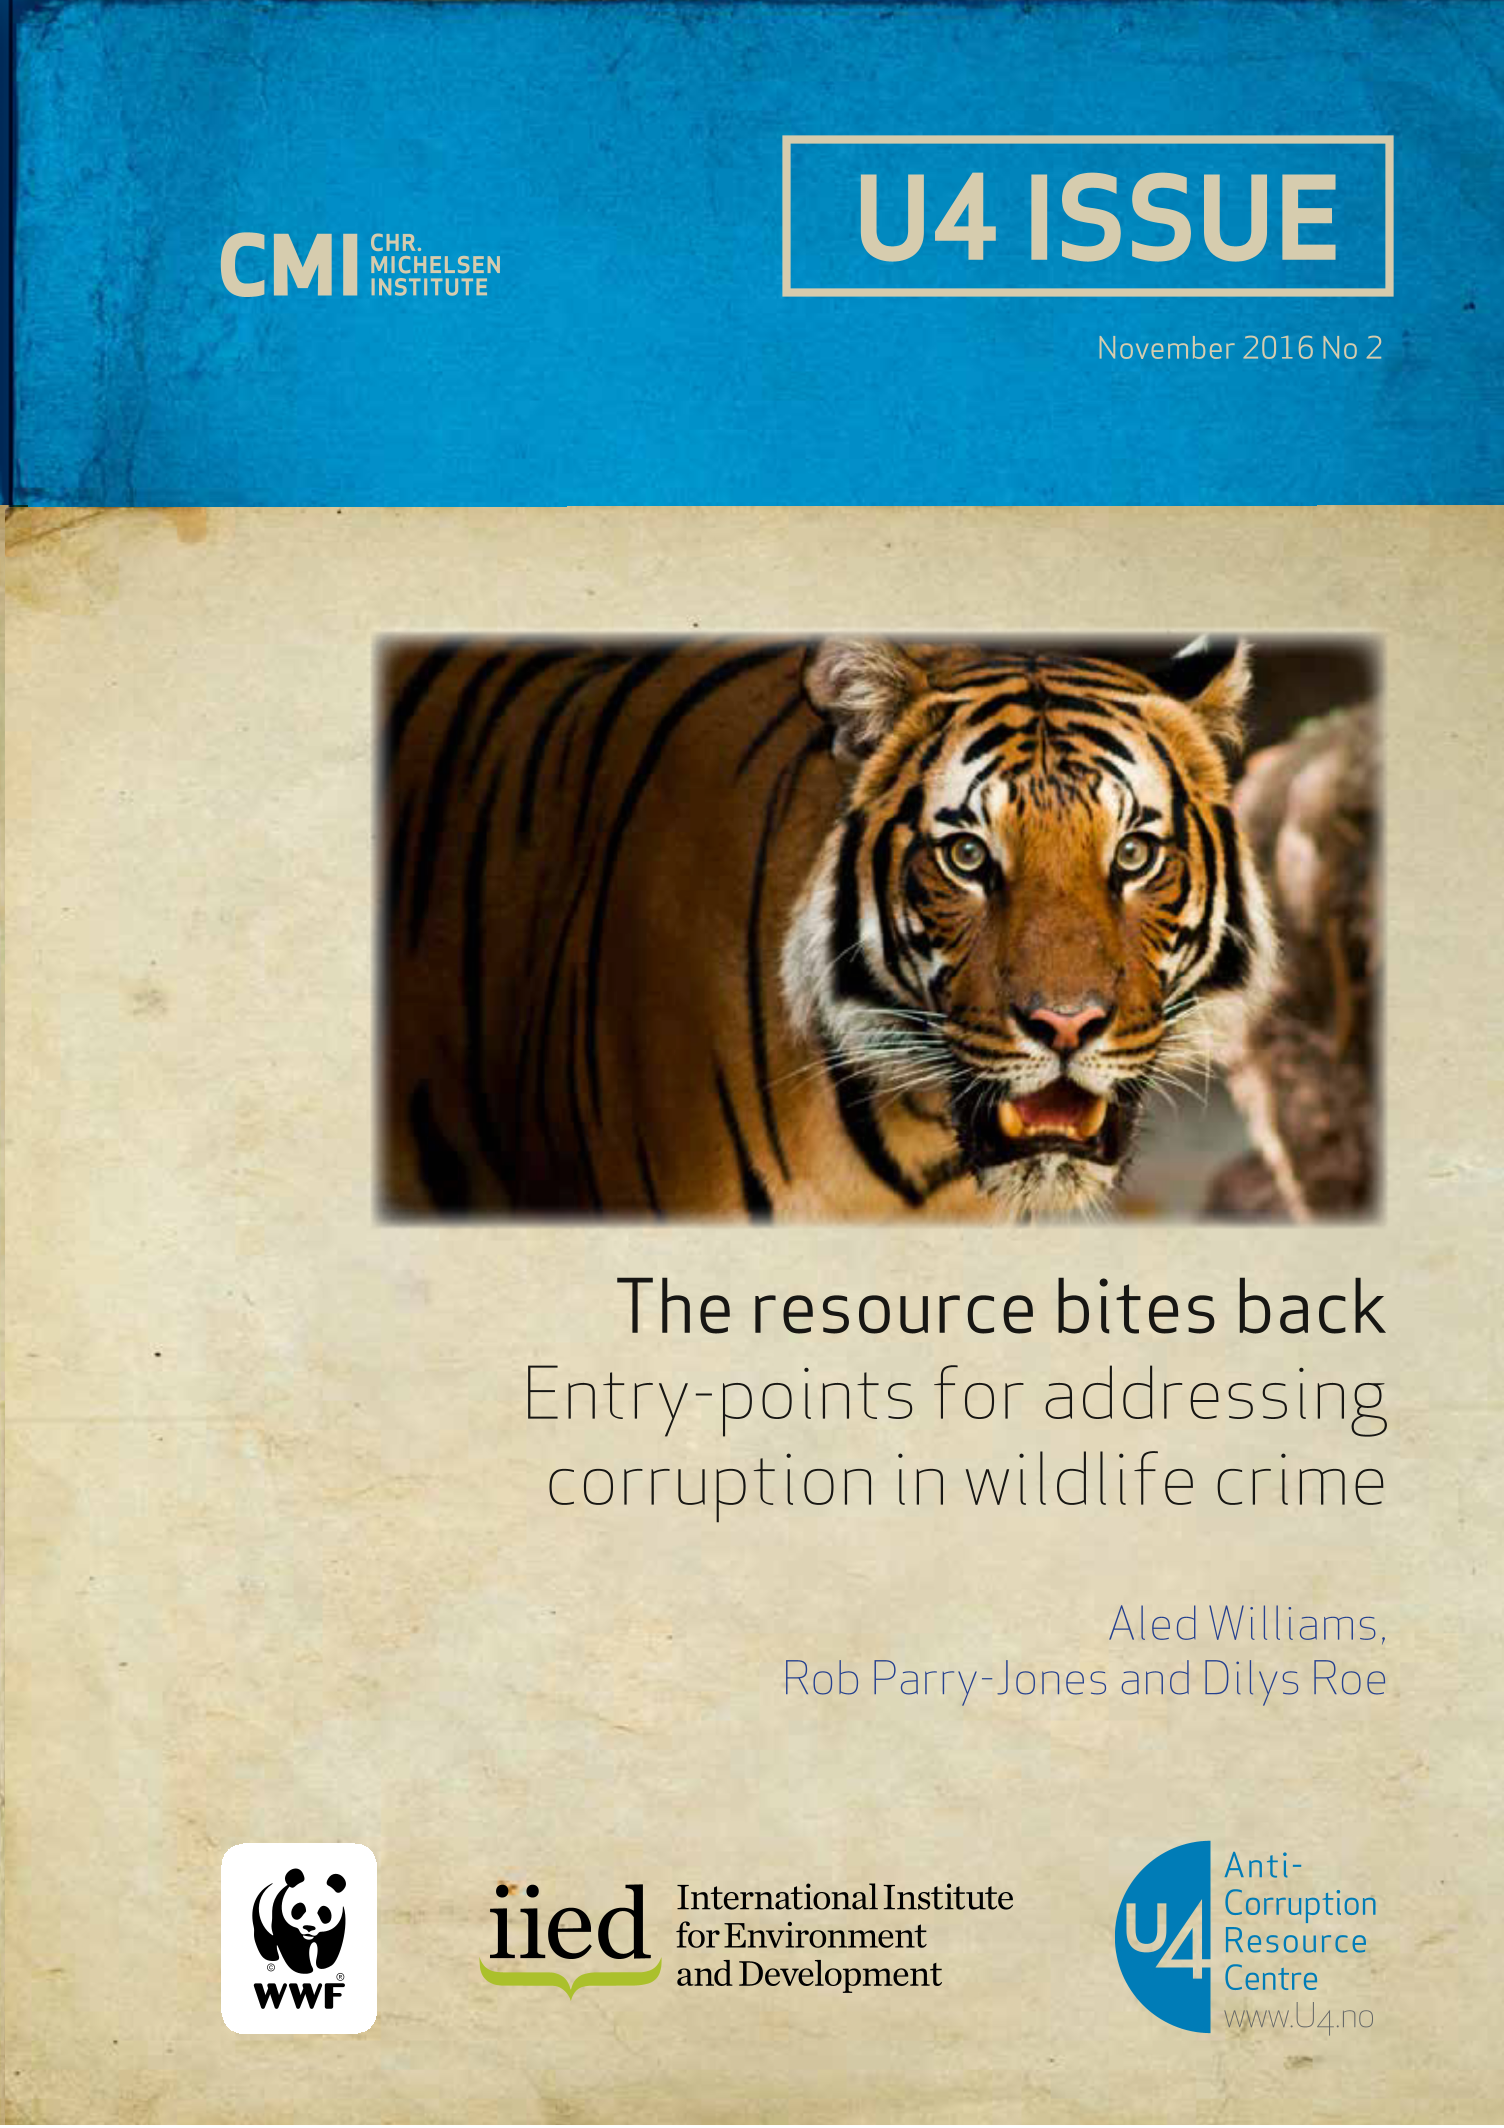 The resource bites back: Entry-points for addressing corruption in wildlife crime